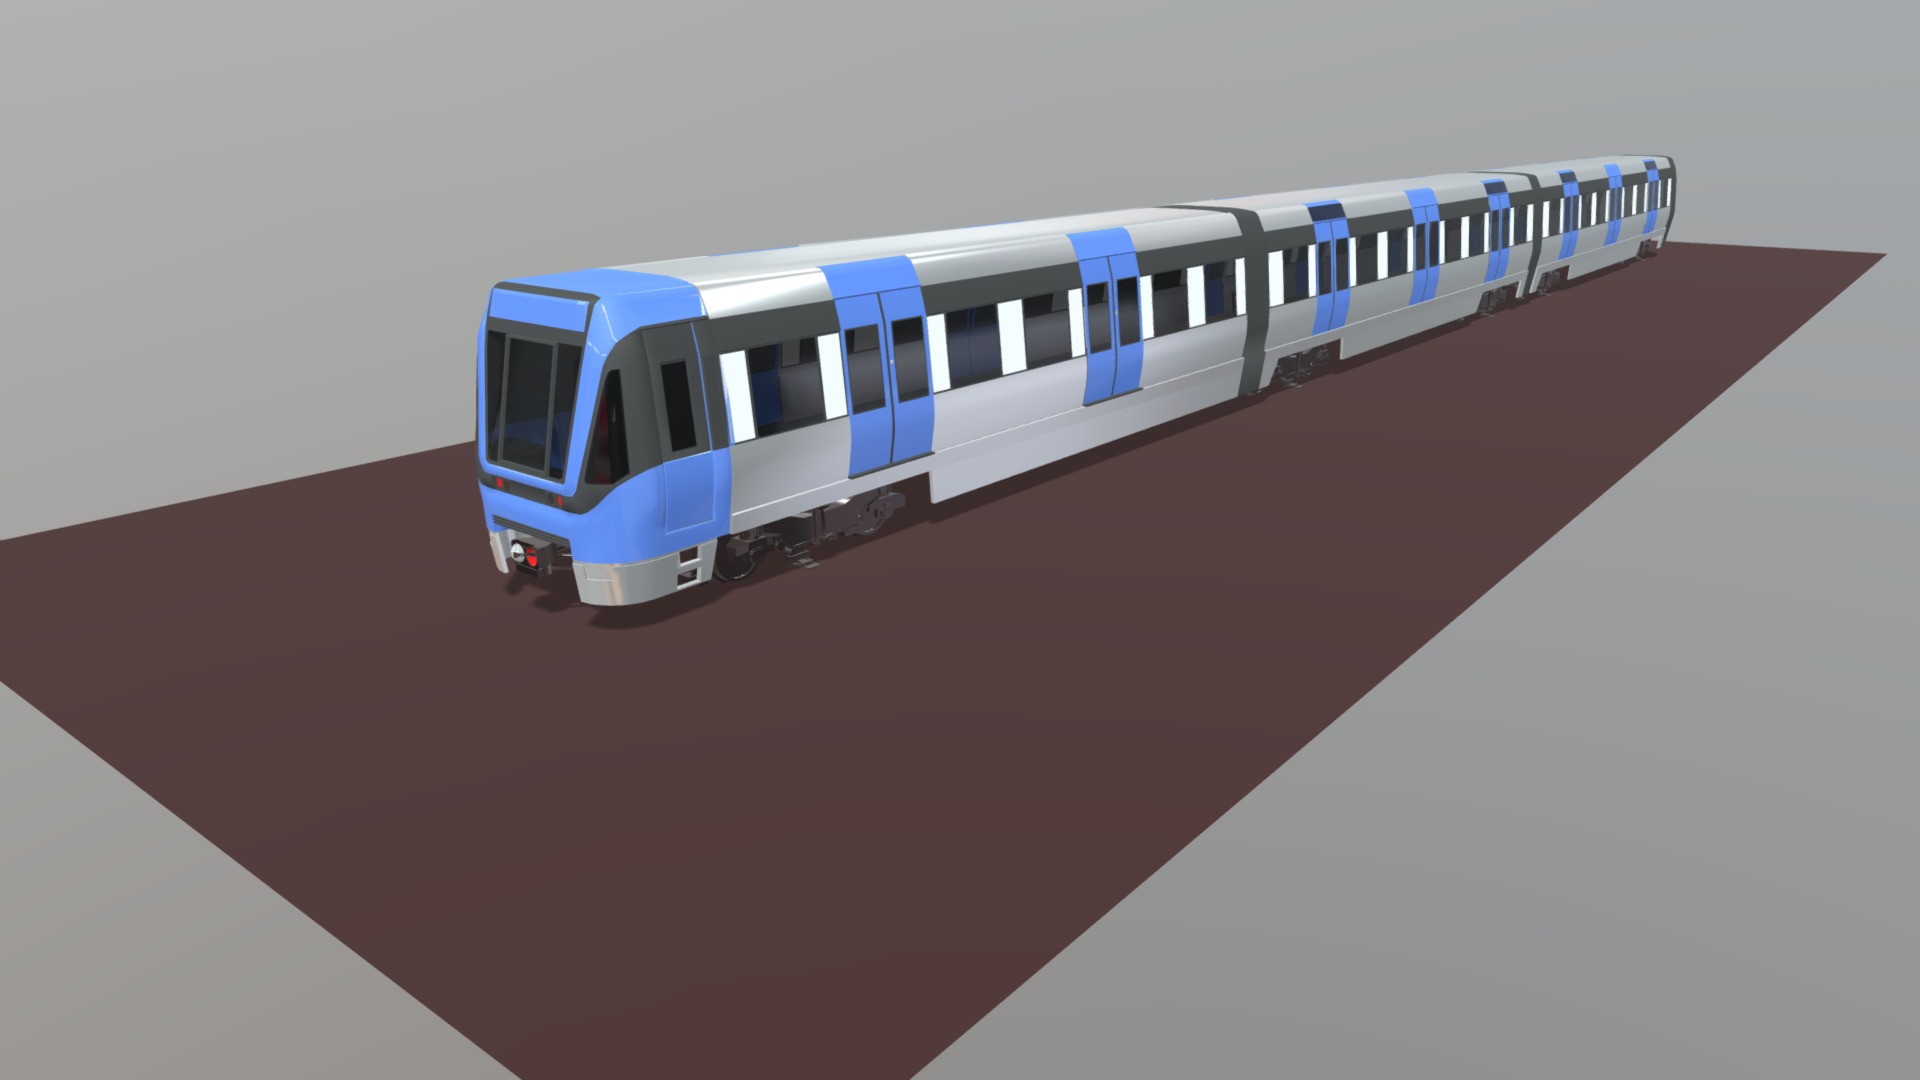 3D model SL C20  SubwayTrain - This is a 3D model of the SL C20  SubwayTrain. The 3D model is about a train on a track.